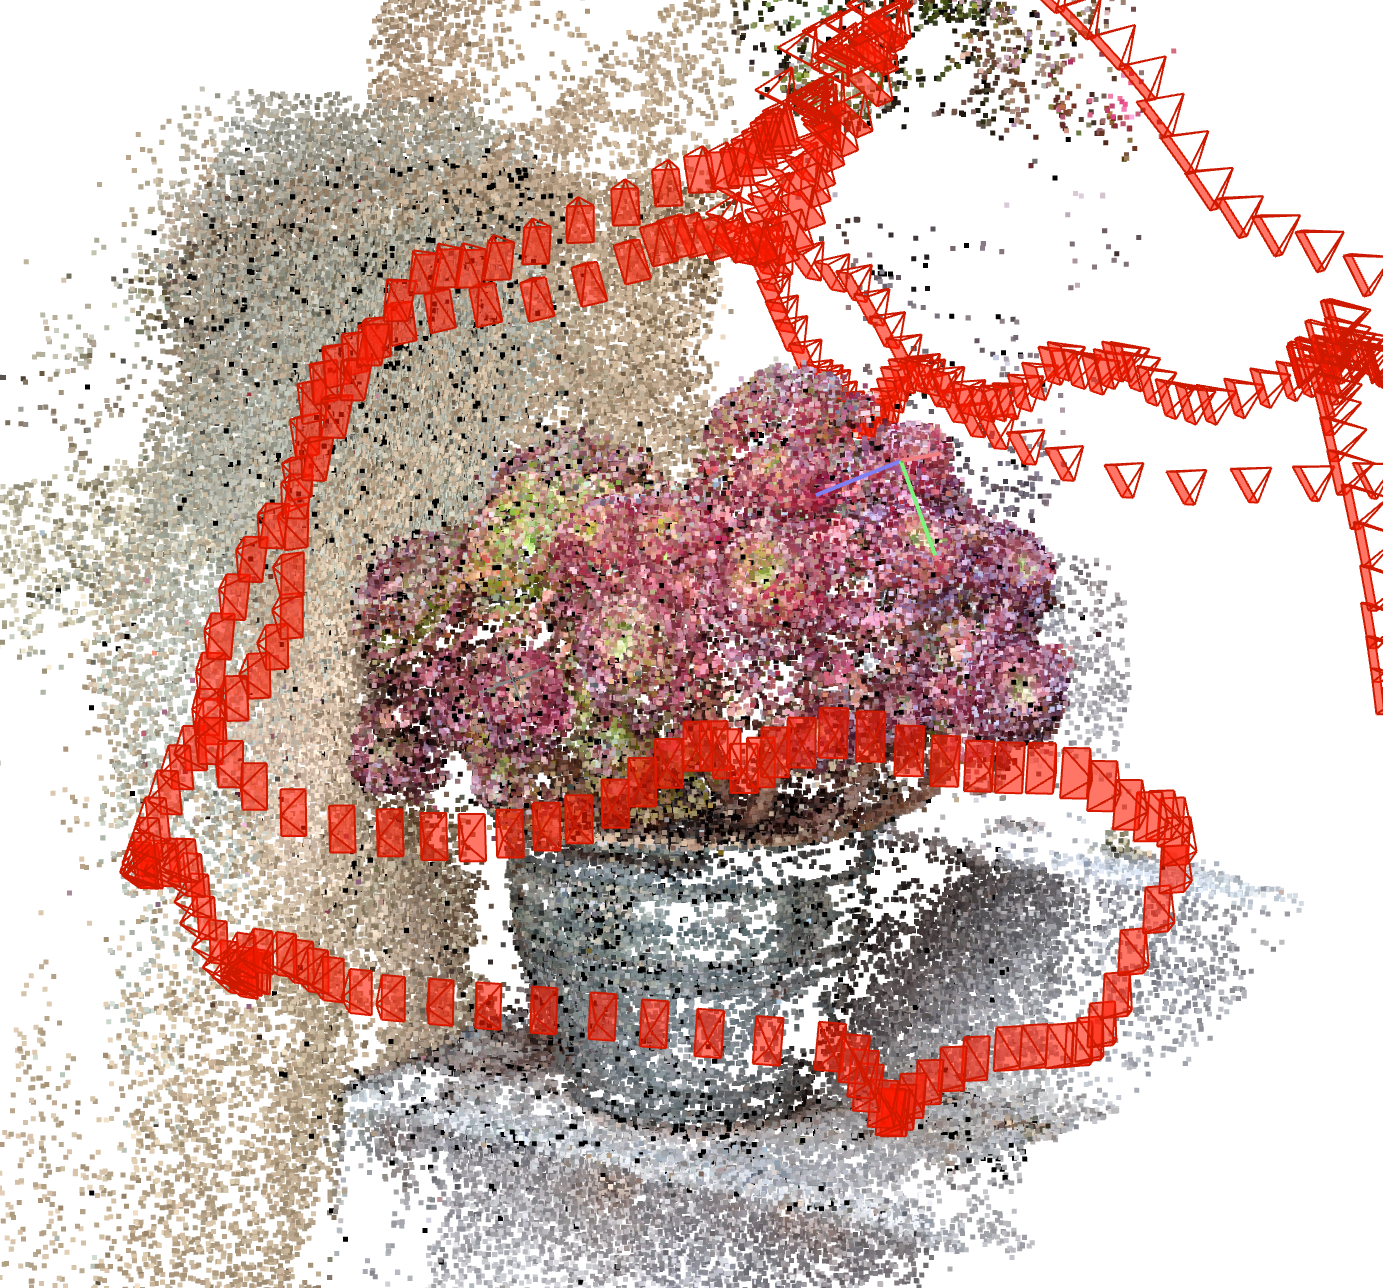 Pointcloud image of a aeonium in a pot